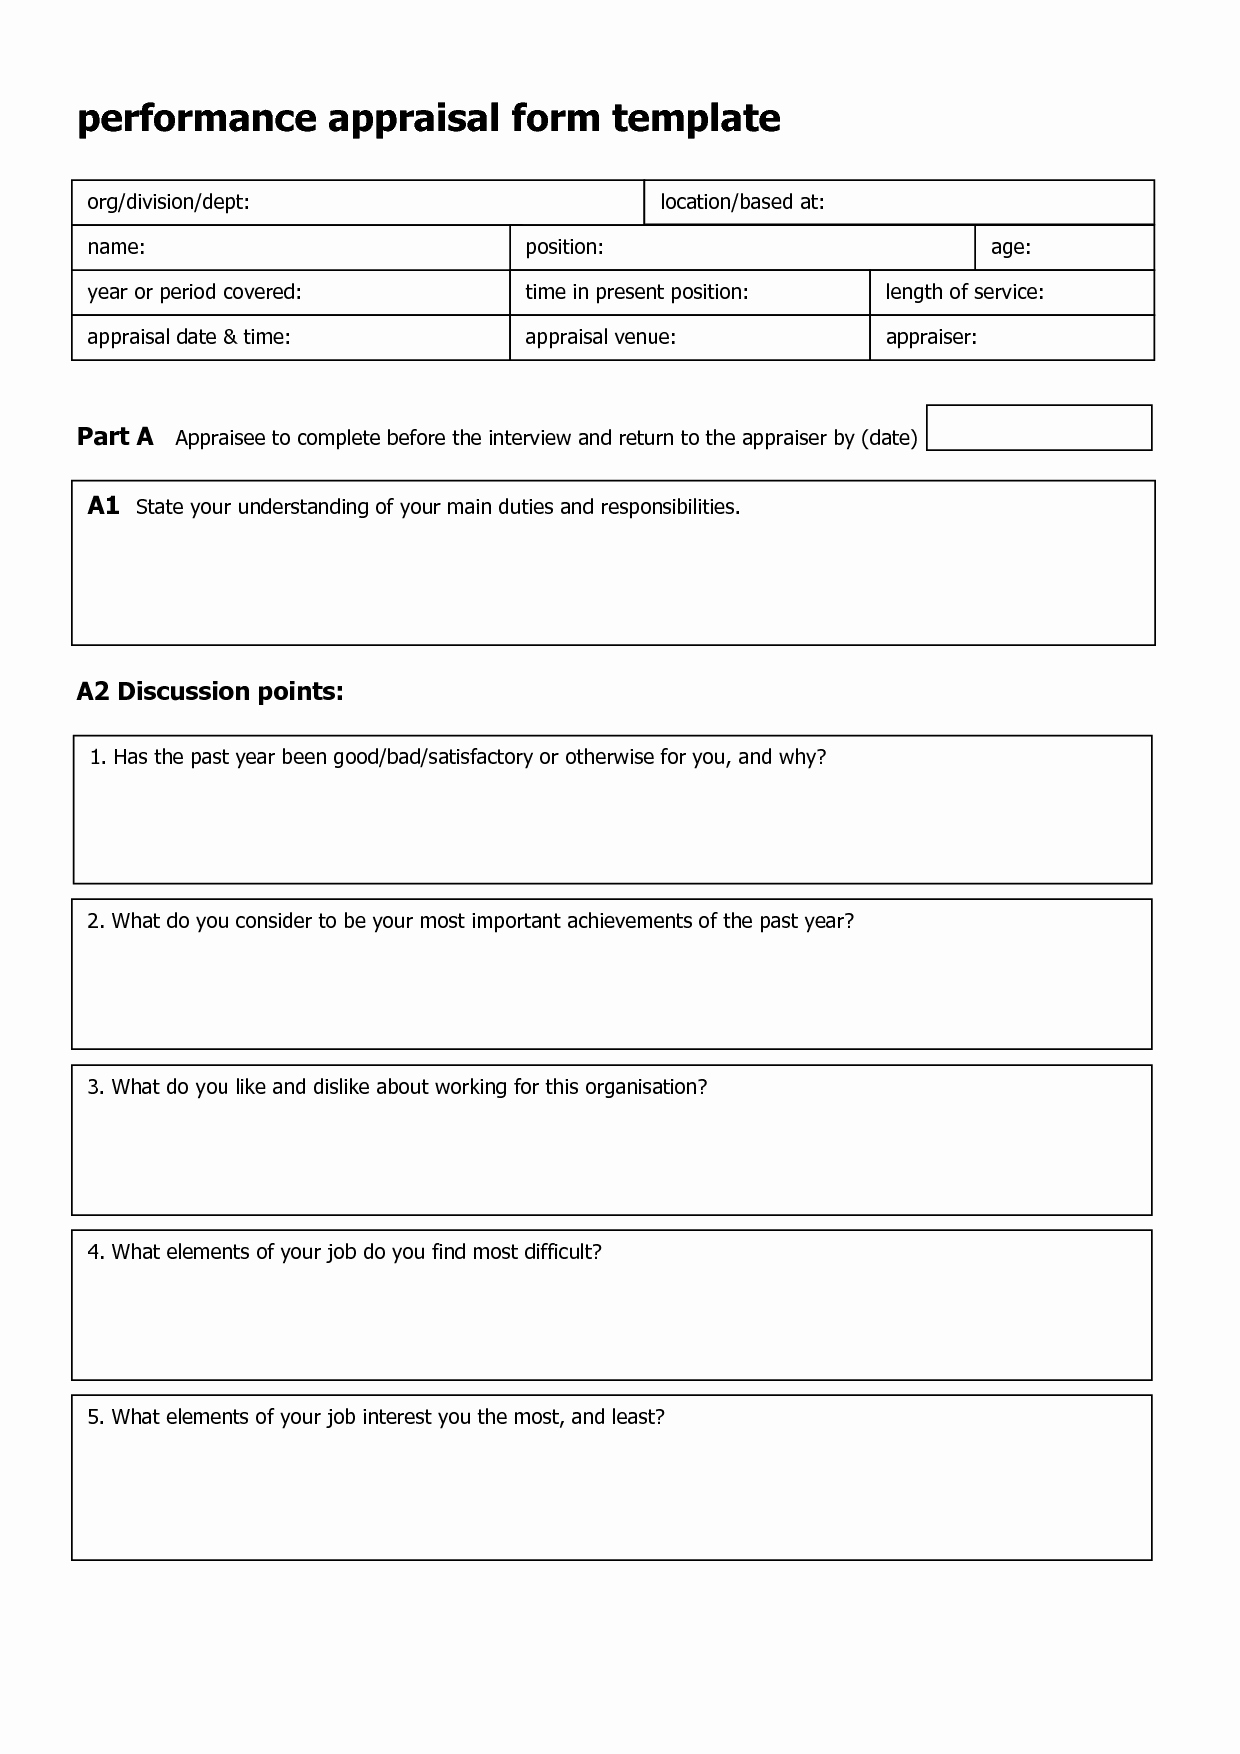 Performance Evaluation form Template Best Of Performance Evaluation forms Templates Invitation